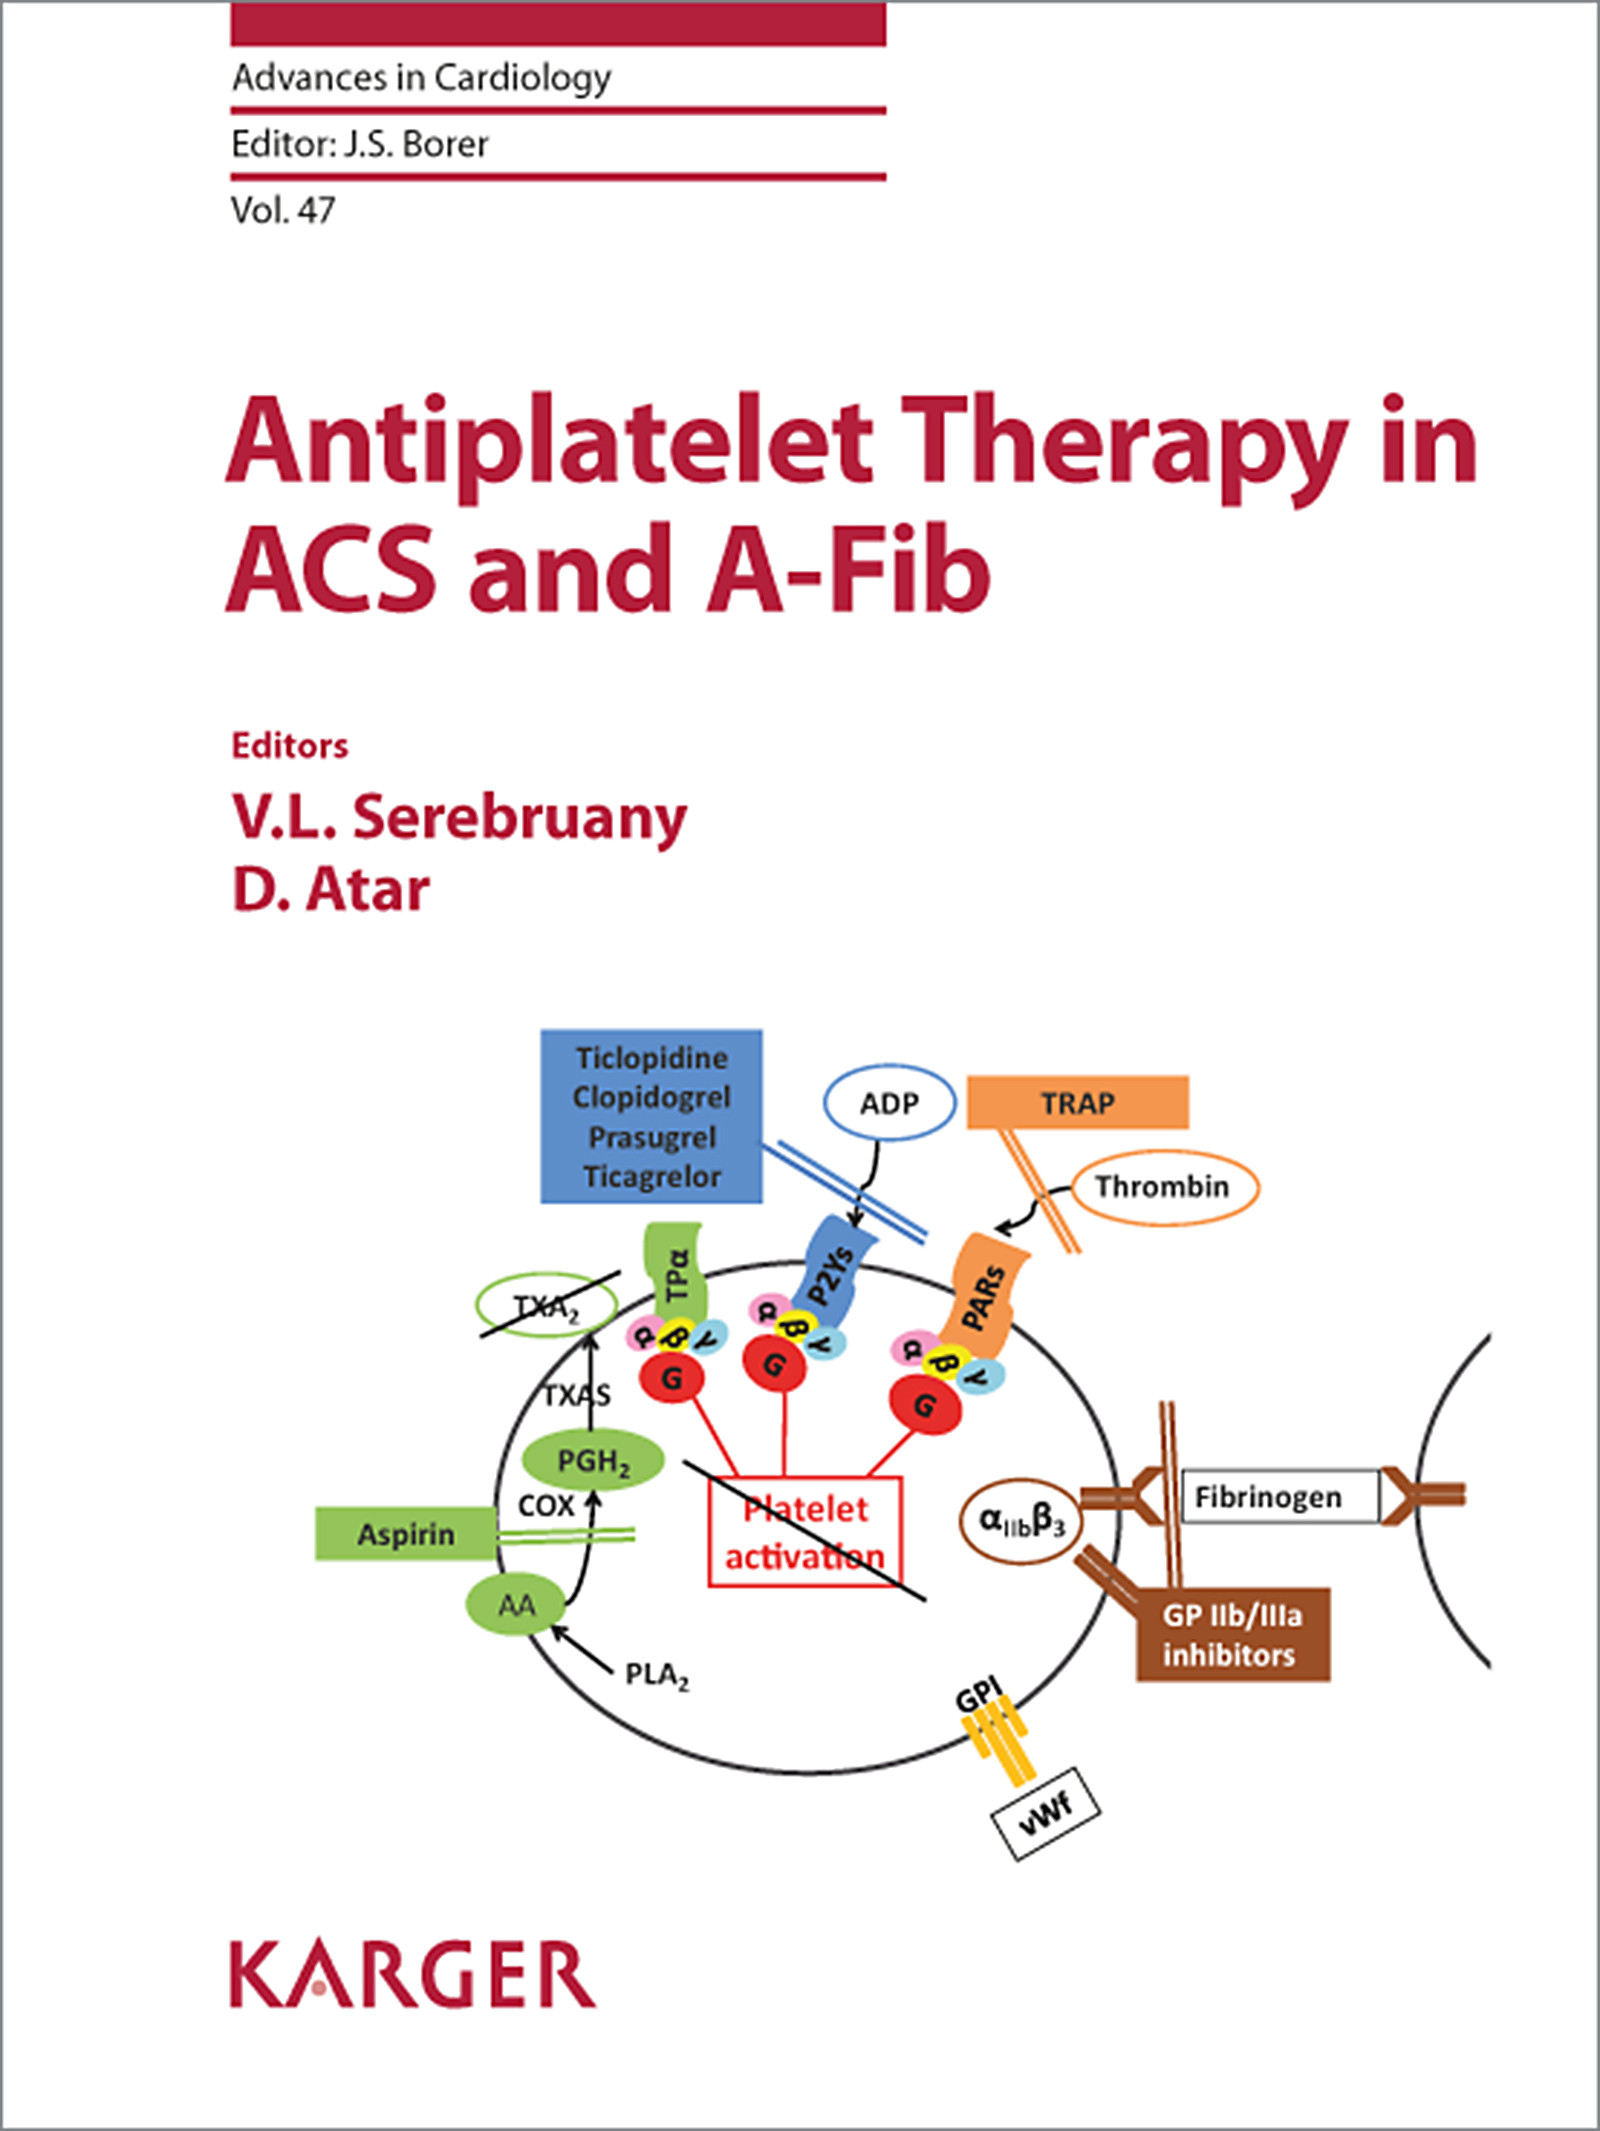 Antiplatelet Therapy in ACS and A-Fib